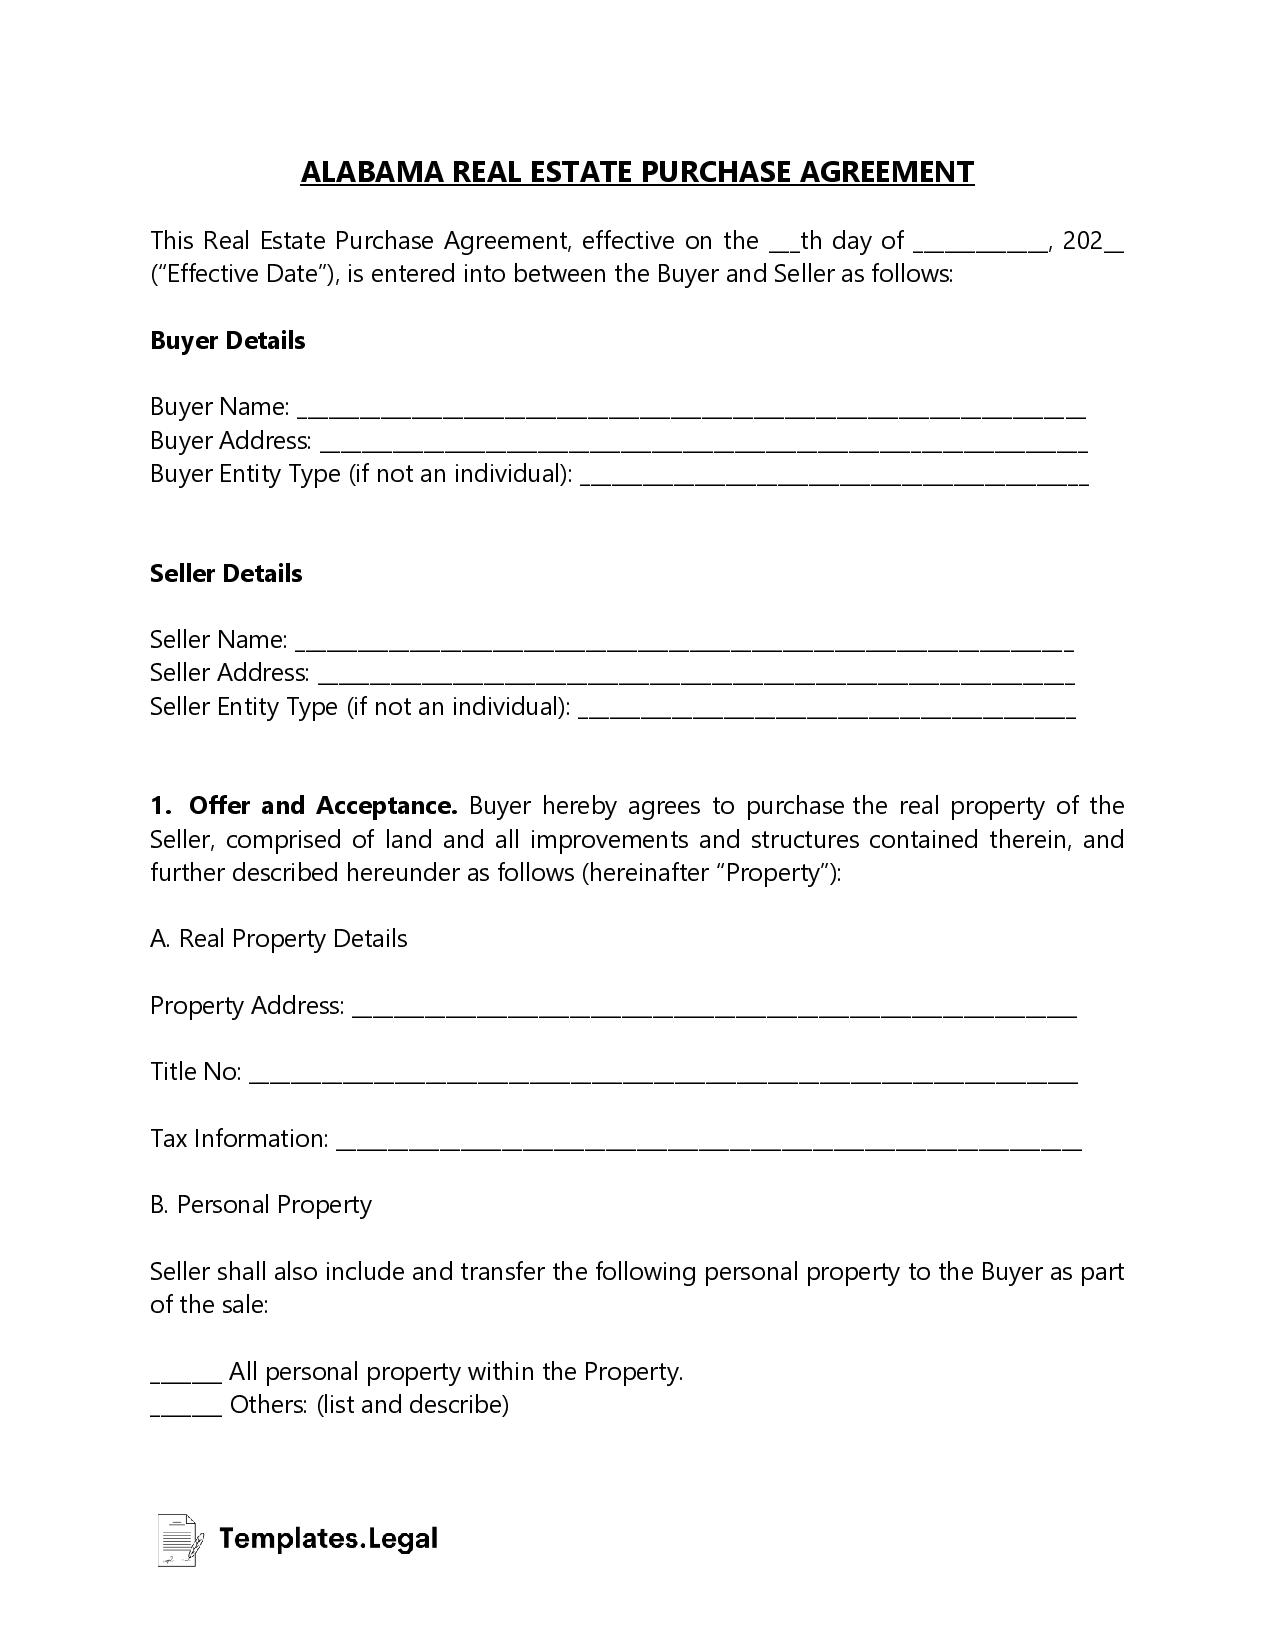 Alabama Real Estate Purchase Agreement - Templates.Legal